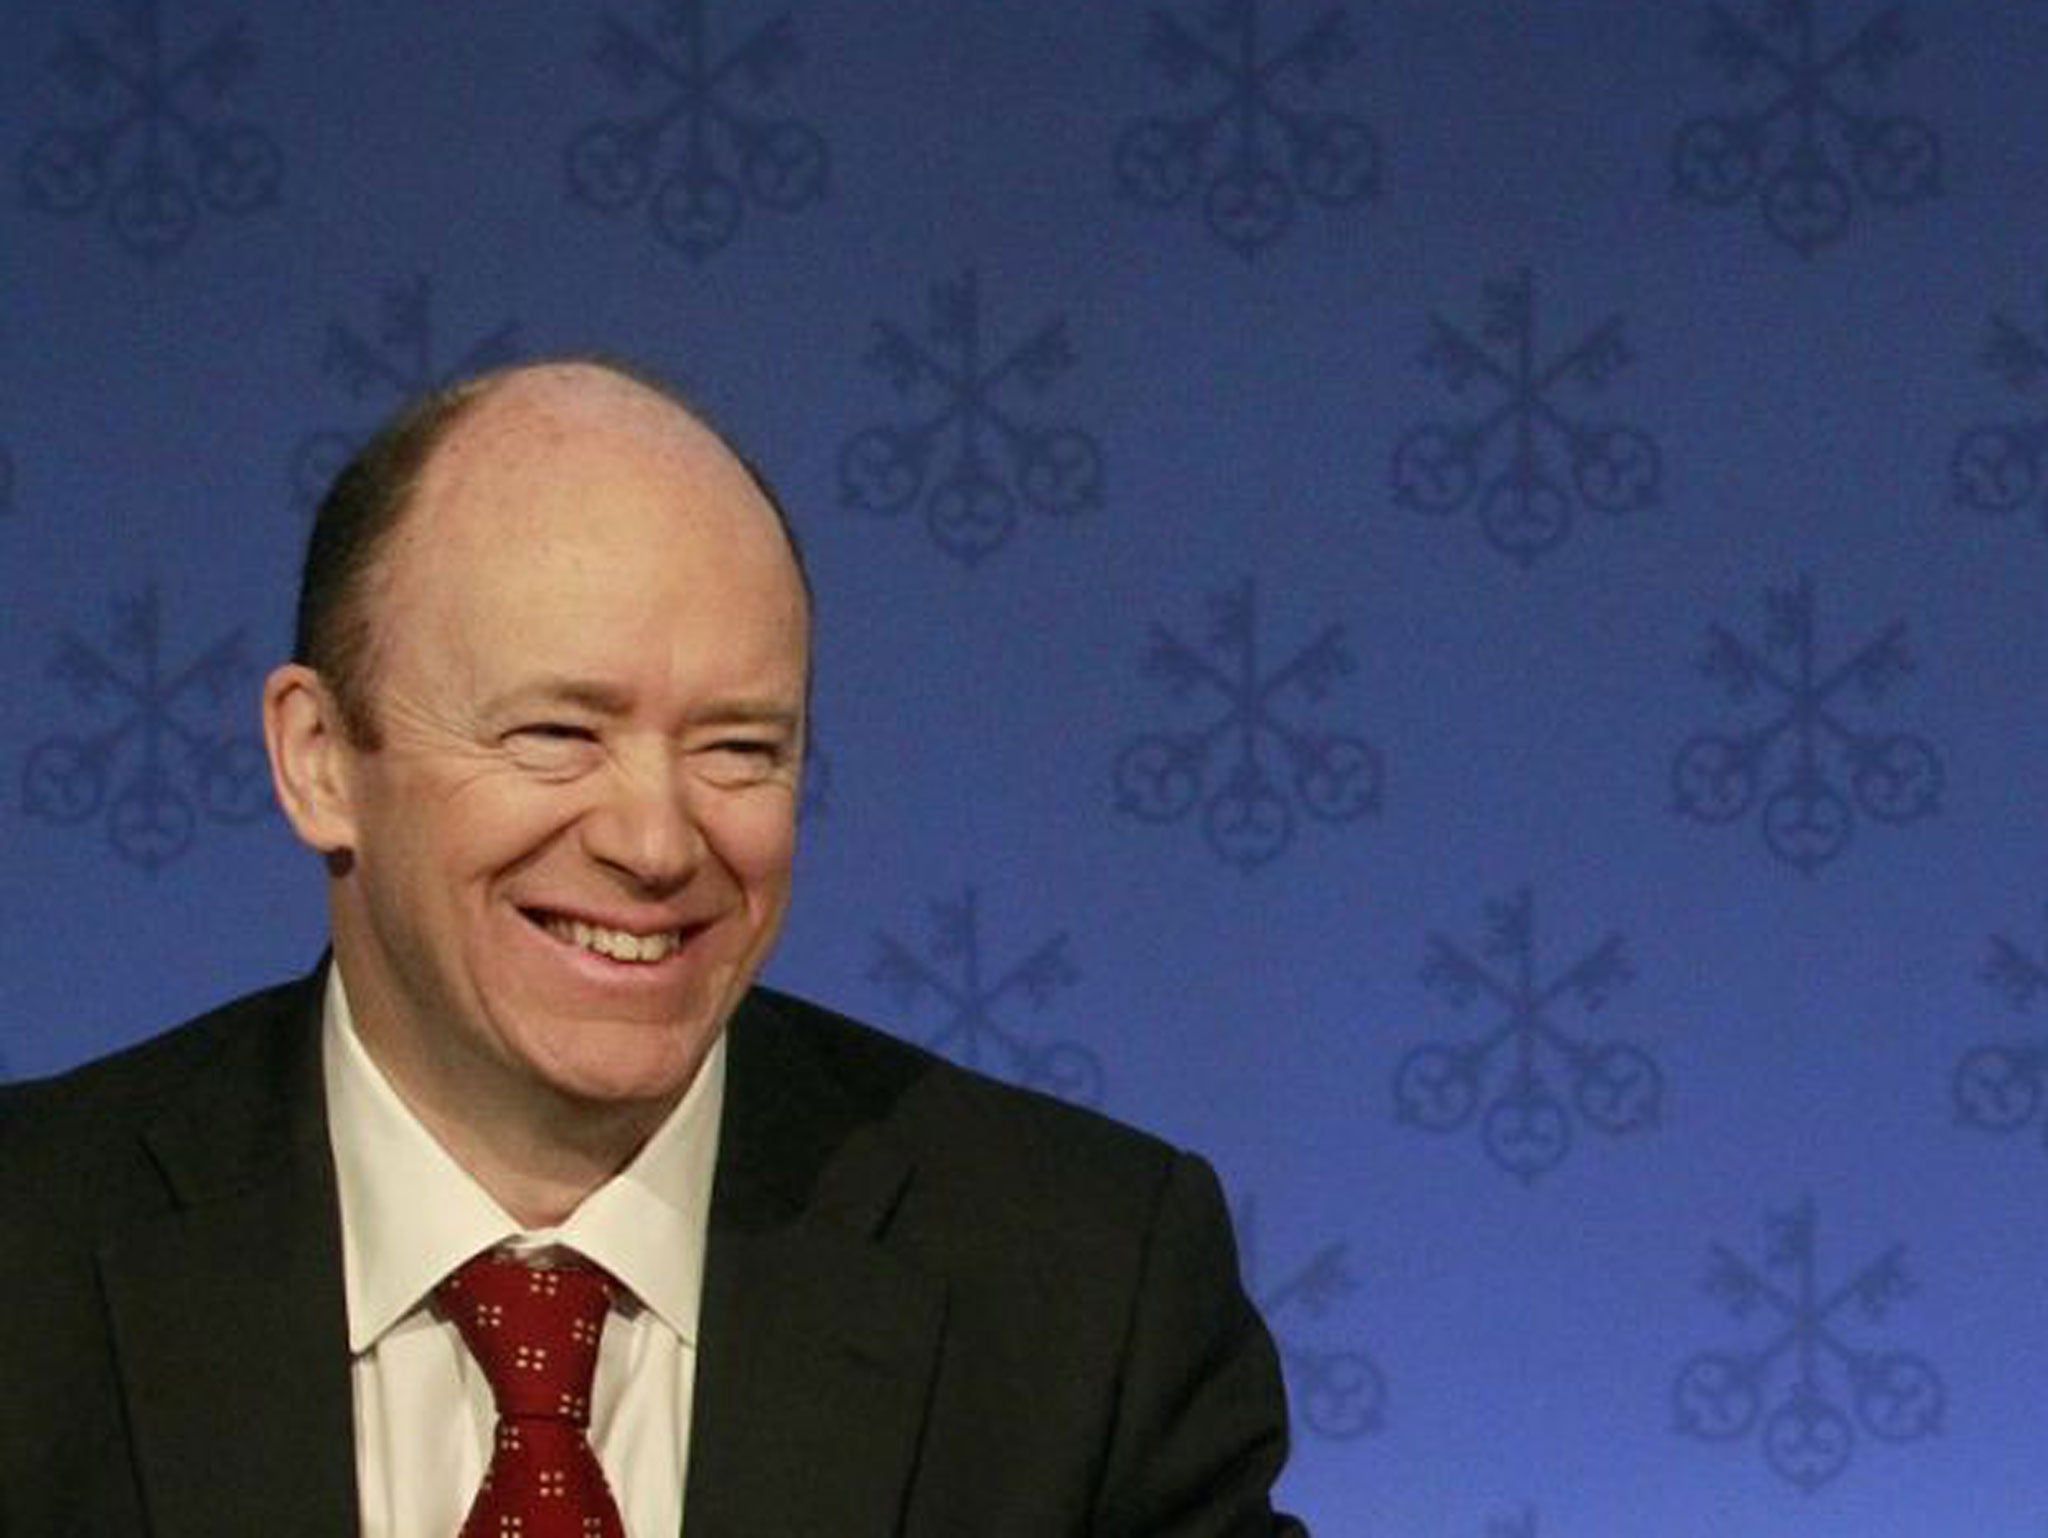 John Cryan, Deutsche Bank's new chief executive and former FD of Switzerland's UBS